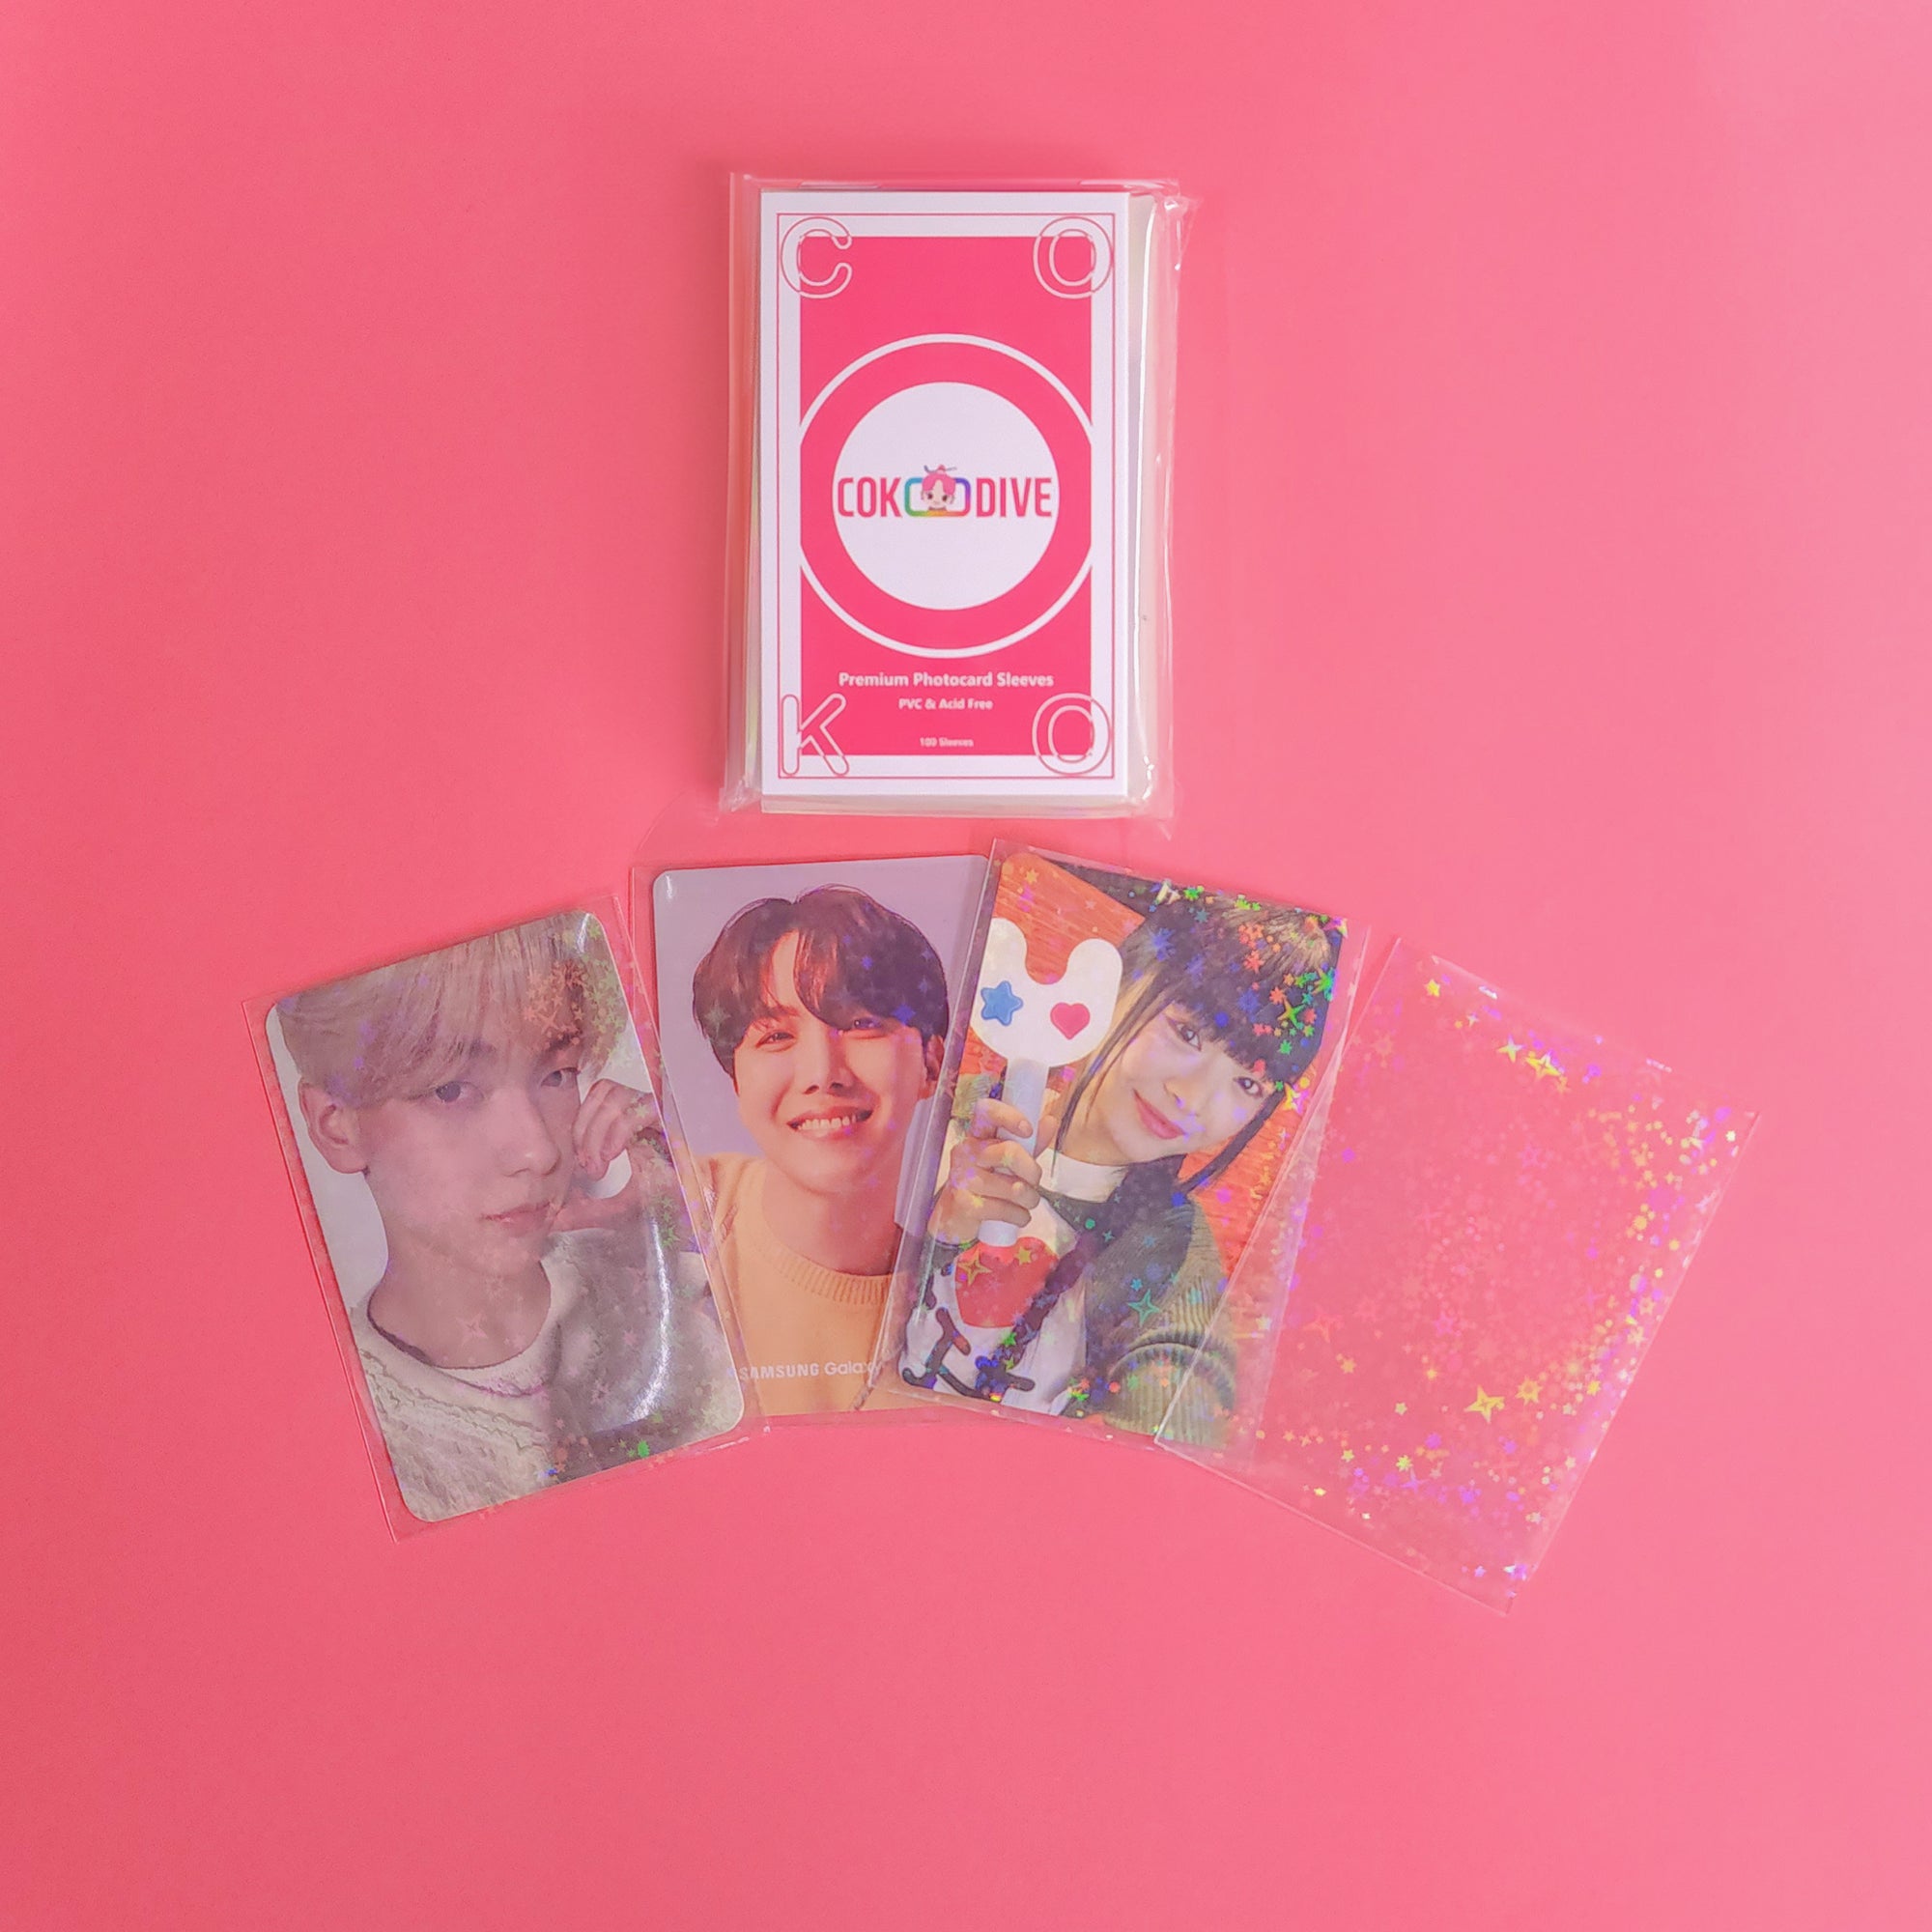 SMALL STAR PHOTOCARD SLEEVES FOR K-POP FANS - COKODIVE